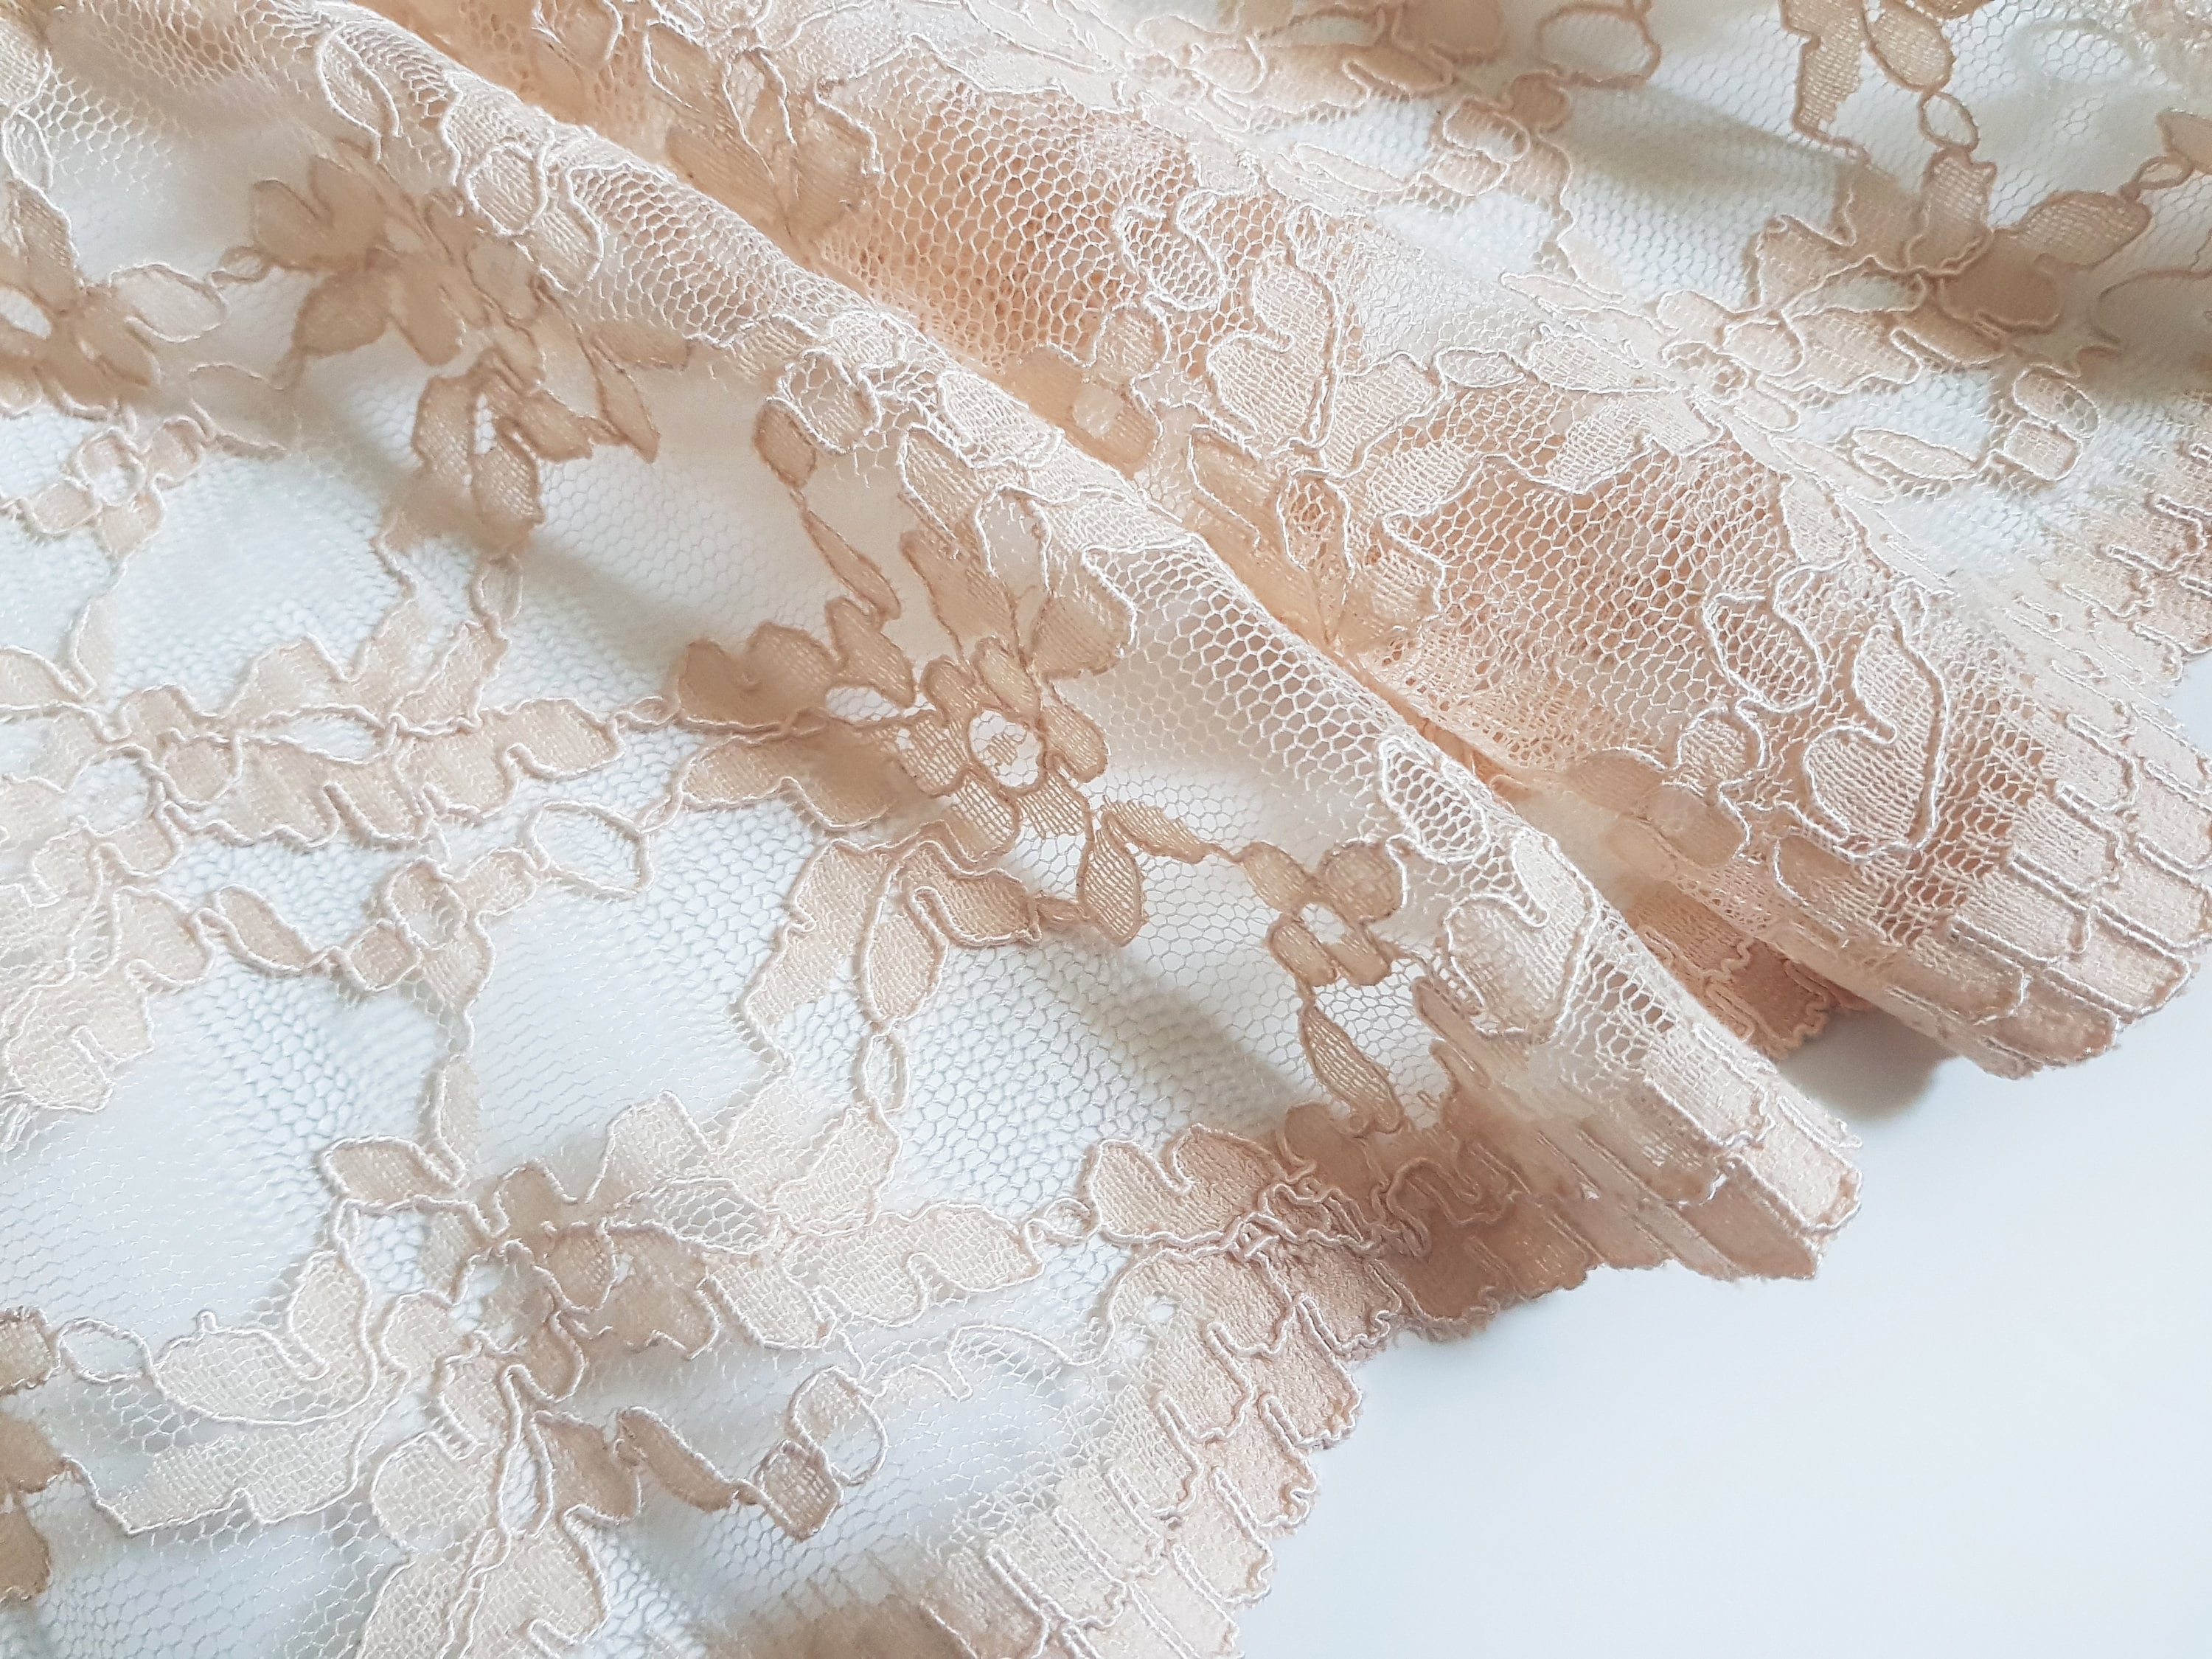 Eggshell Corded Lace Fabric With Scallop Border. 53 - Etsy UK